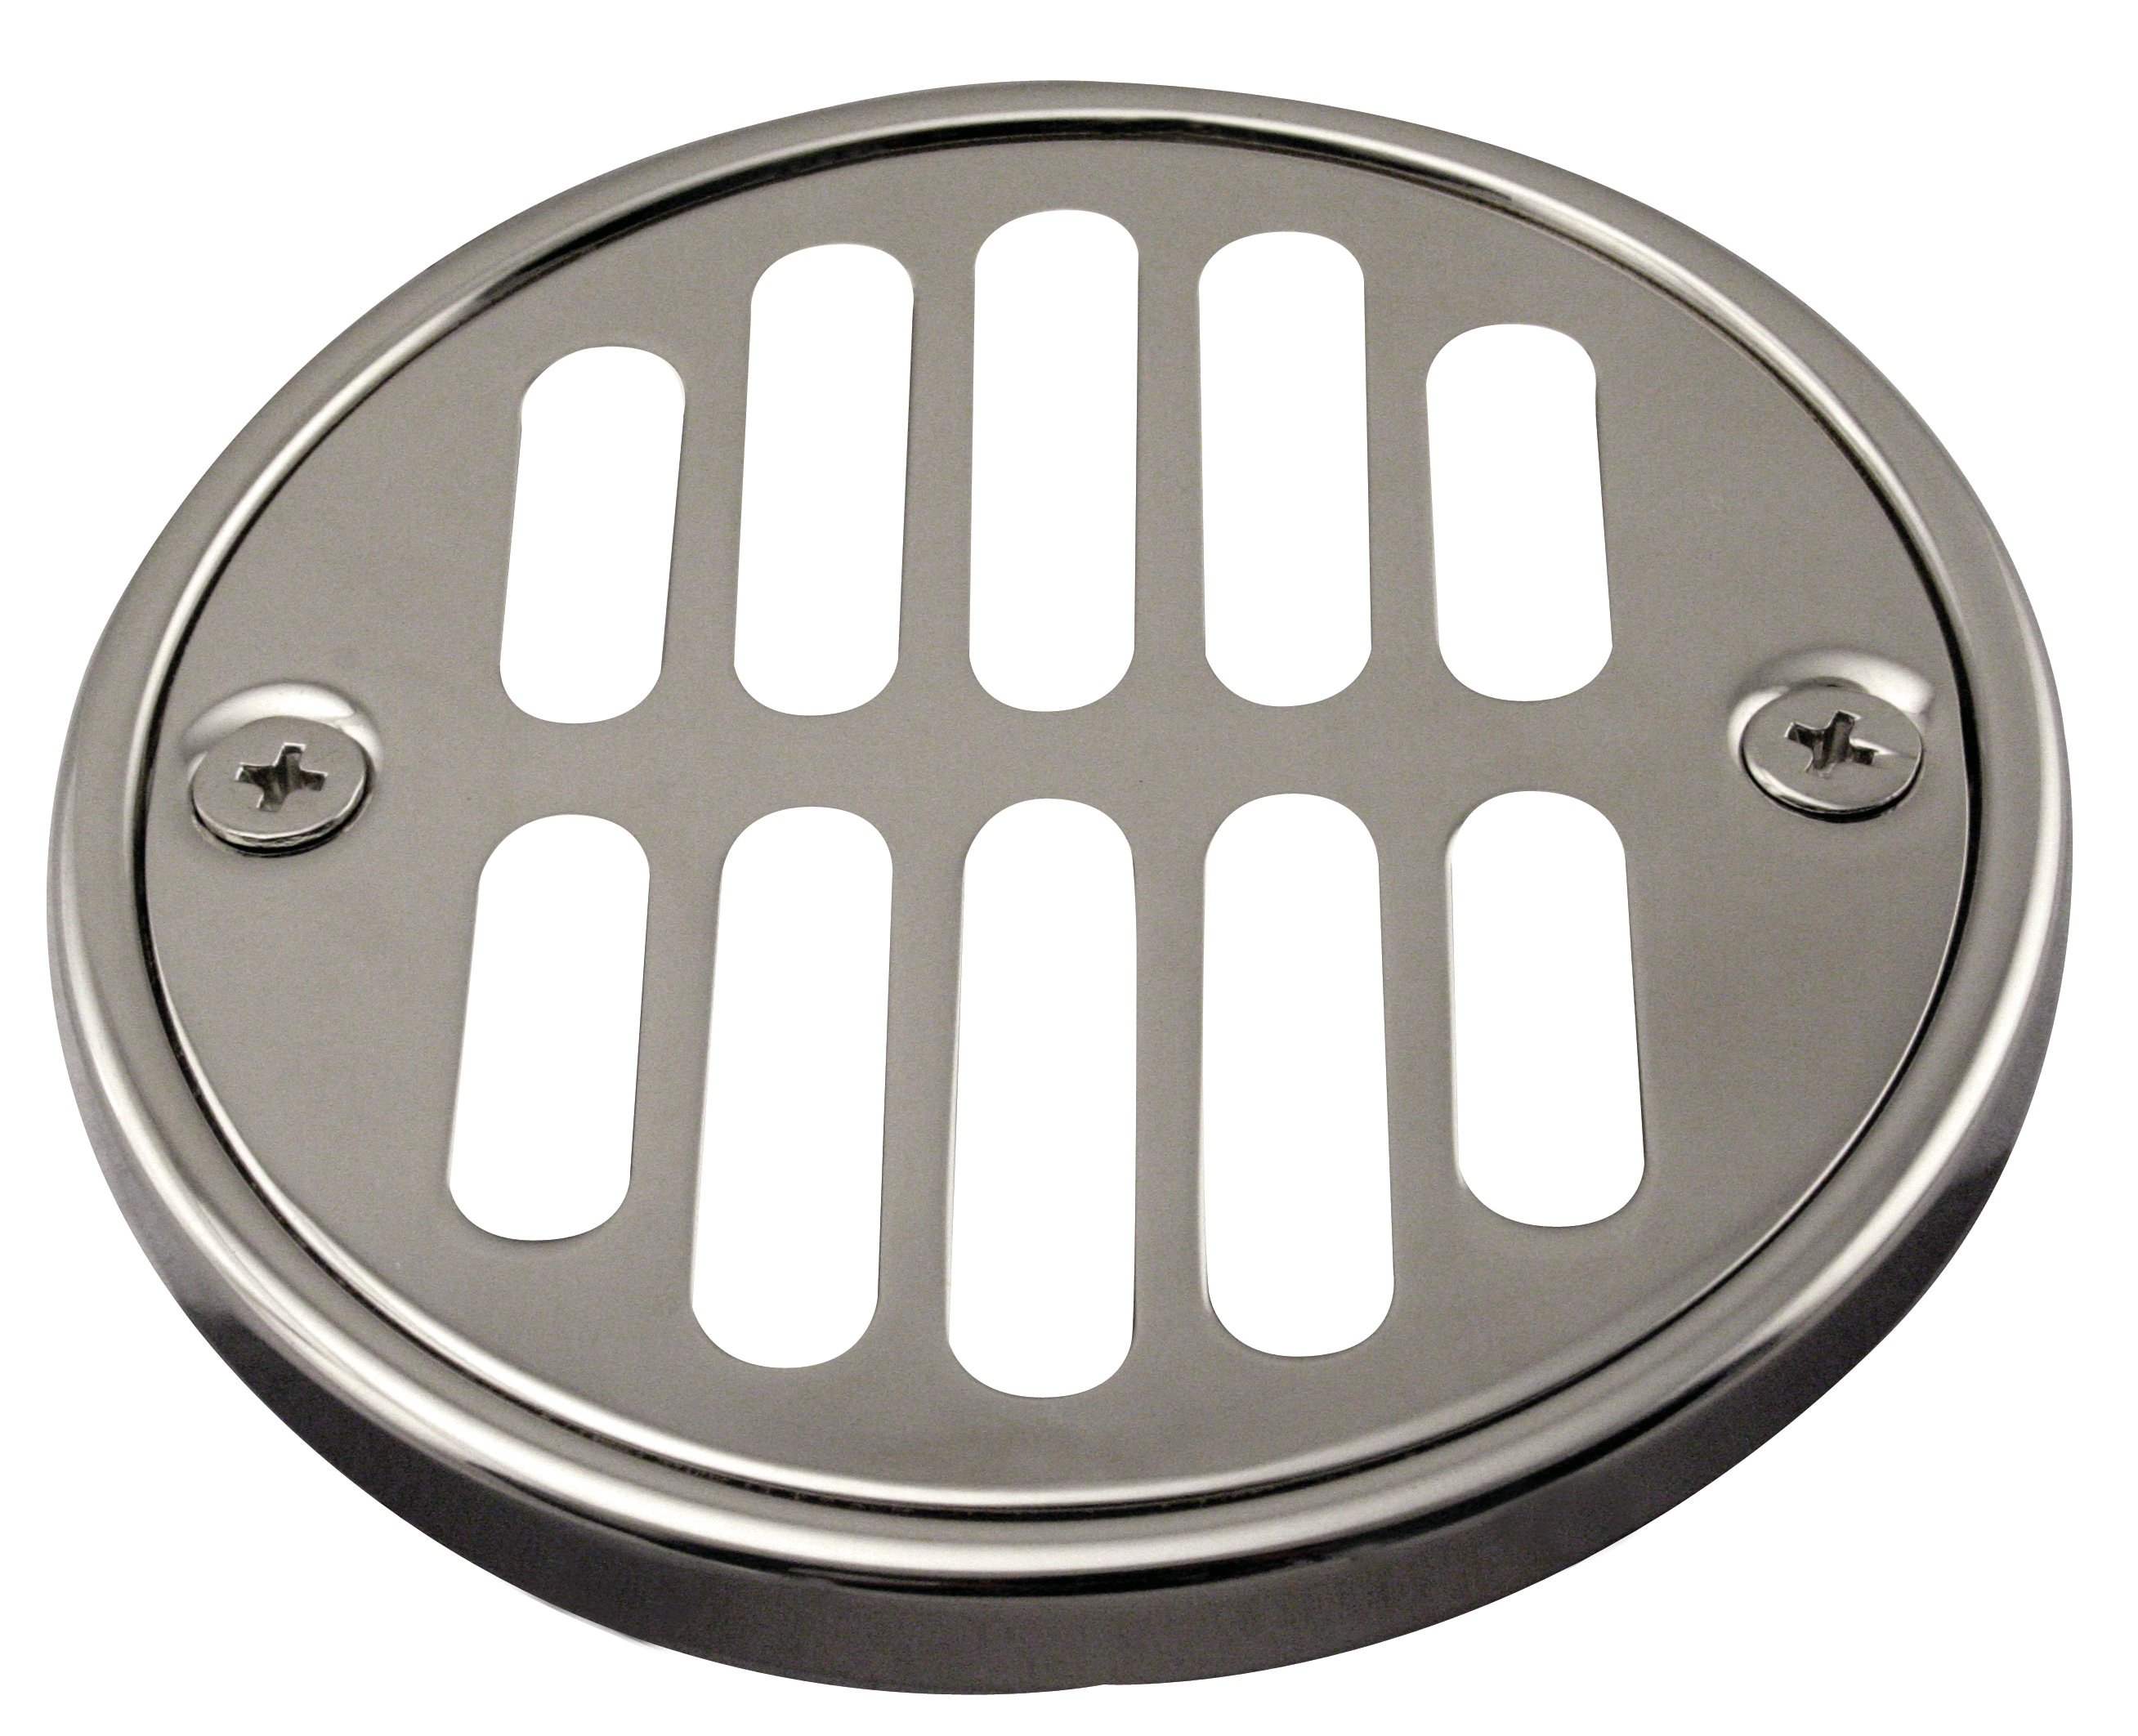 Crawford Drain Cover 3 (2 7/8) Round Drain Strainer Cover - Brushed  Stainless